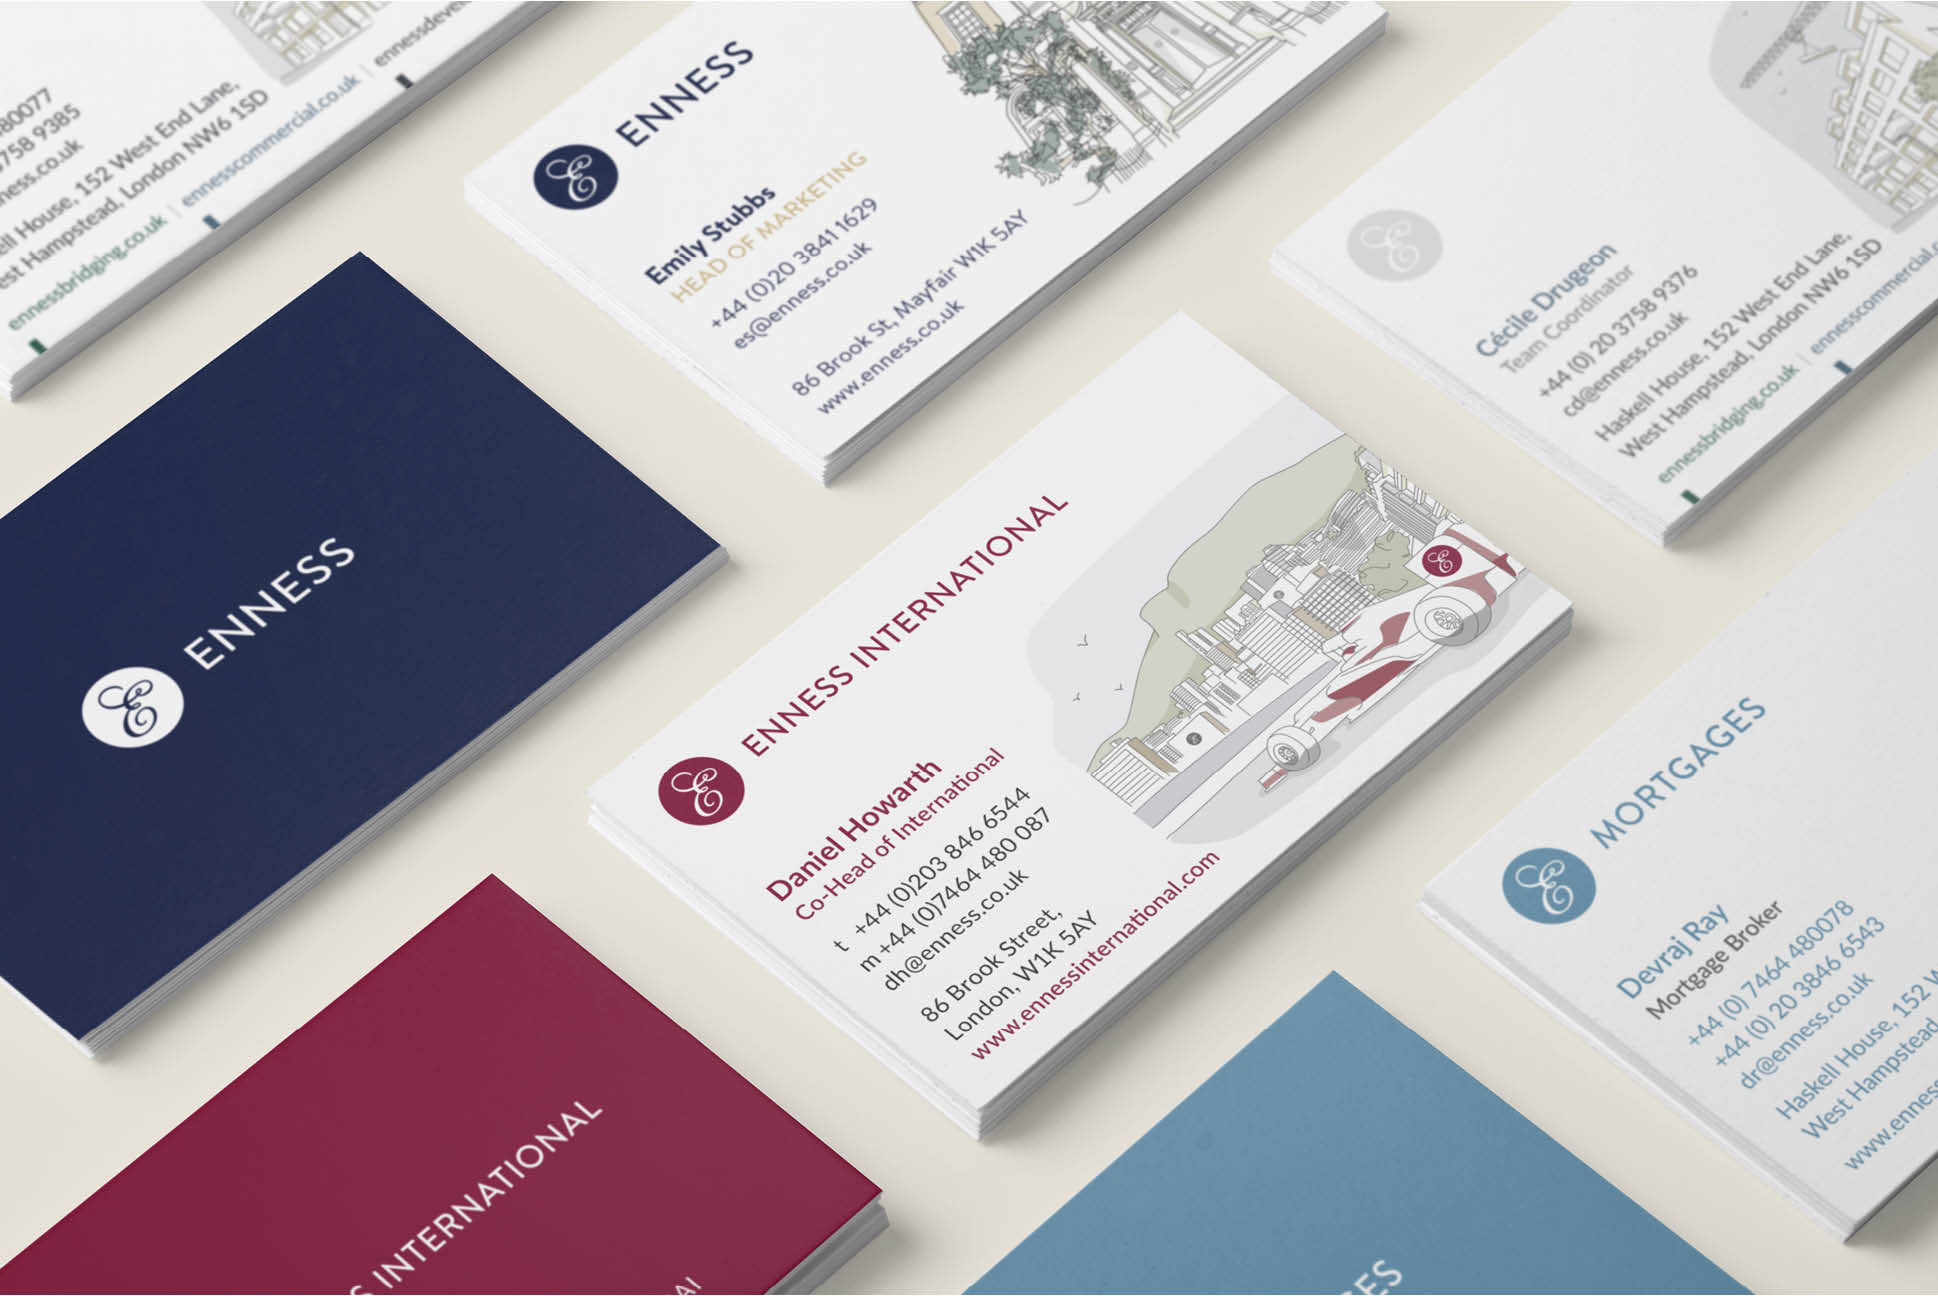 Enness Business cards | Enness Website | Independent Marketing Brand Audit and Branding Refresh Services | IM London